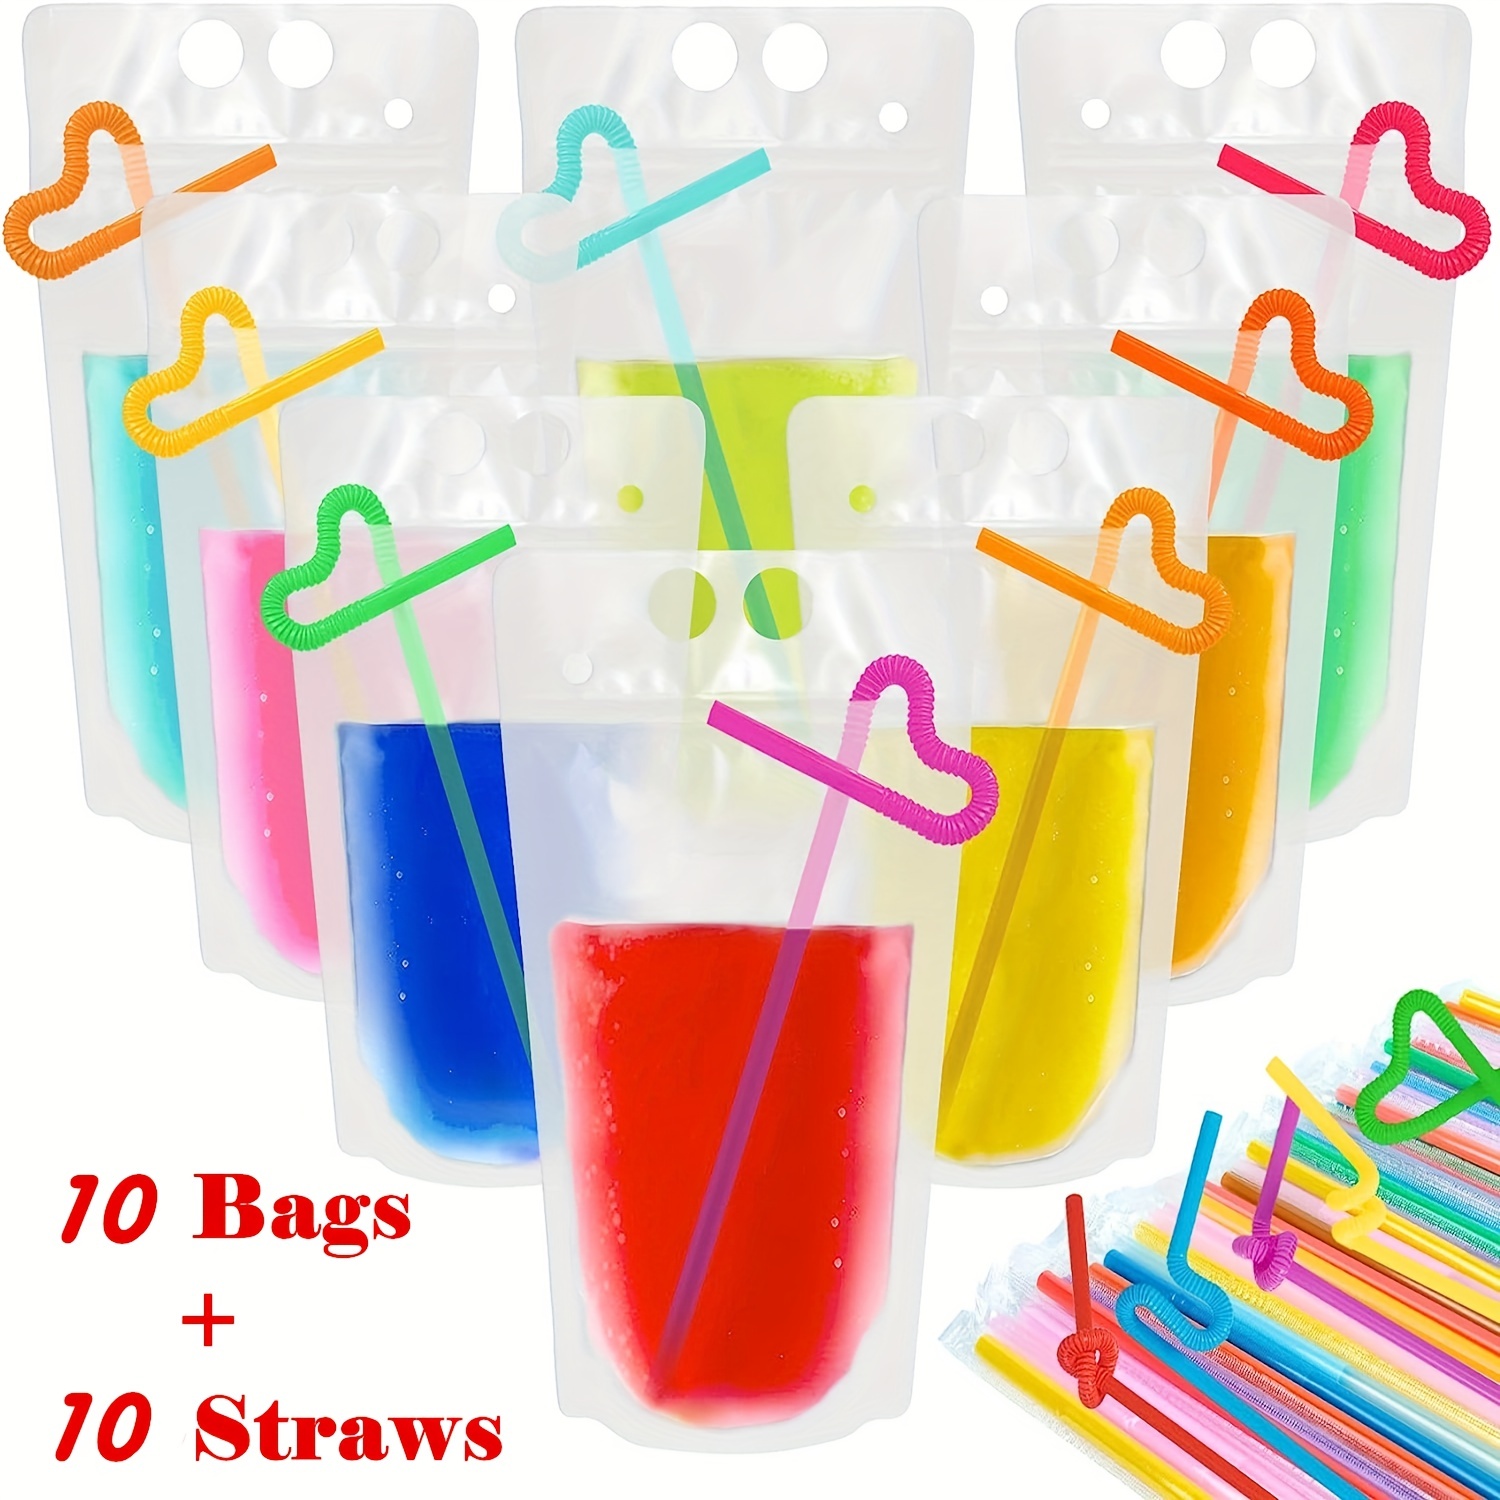 10pcs Drink Pouches(Without straw) - Perfect For Cold & Hot Drinks